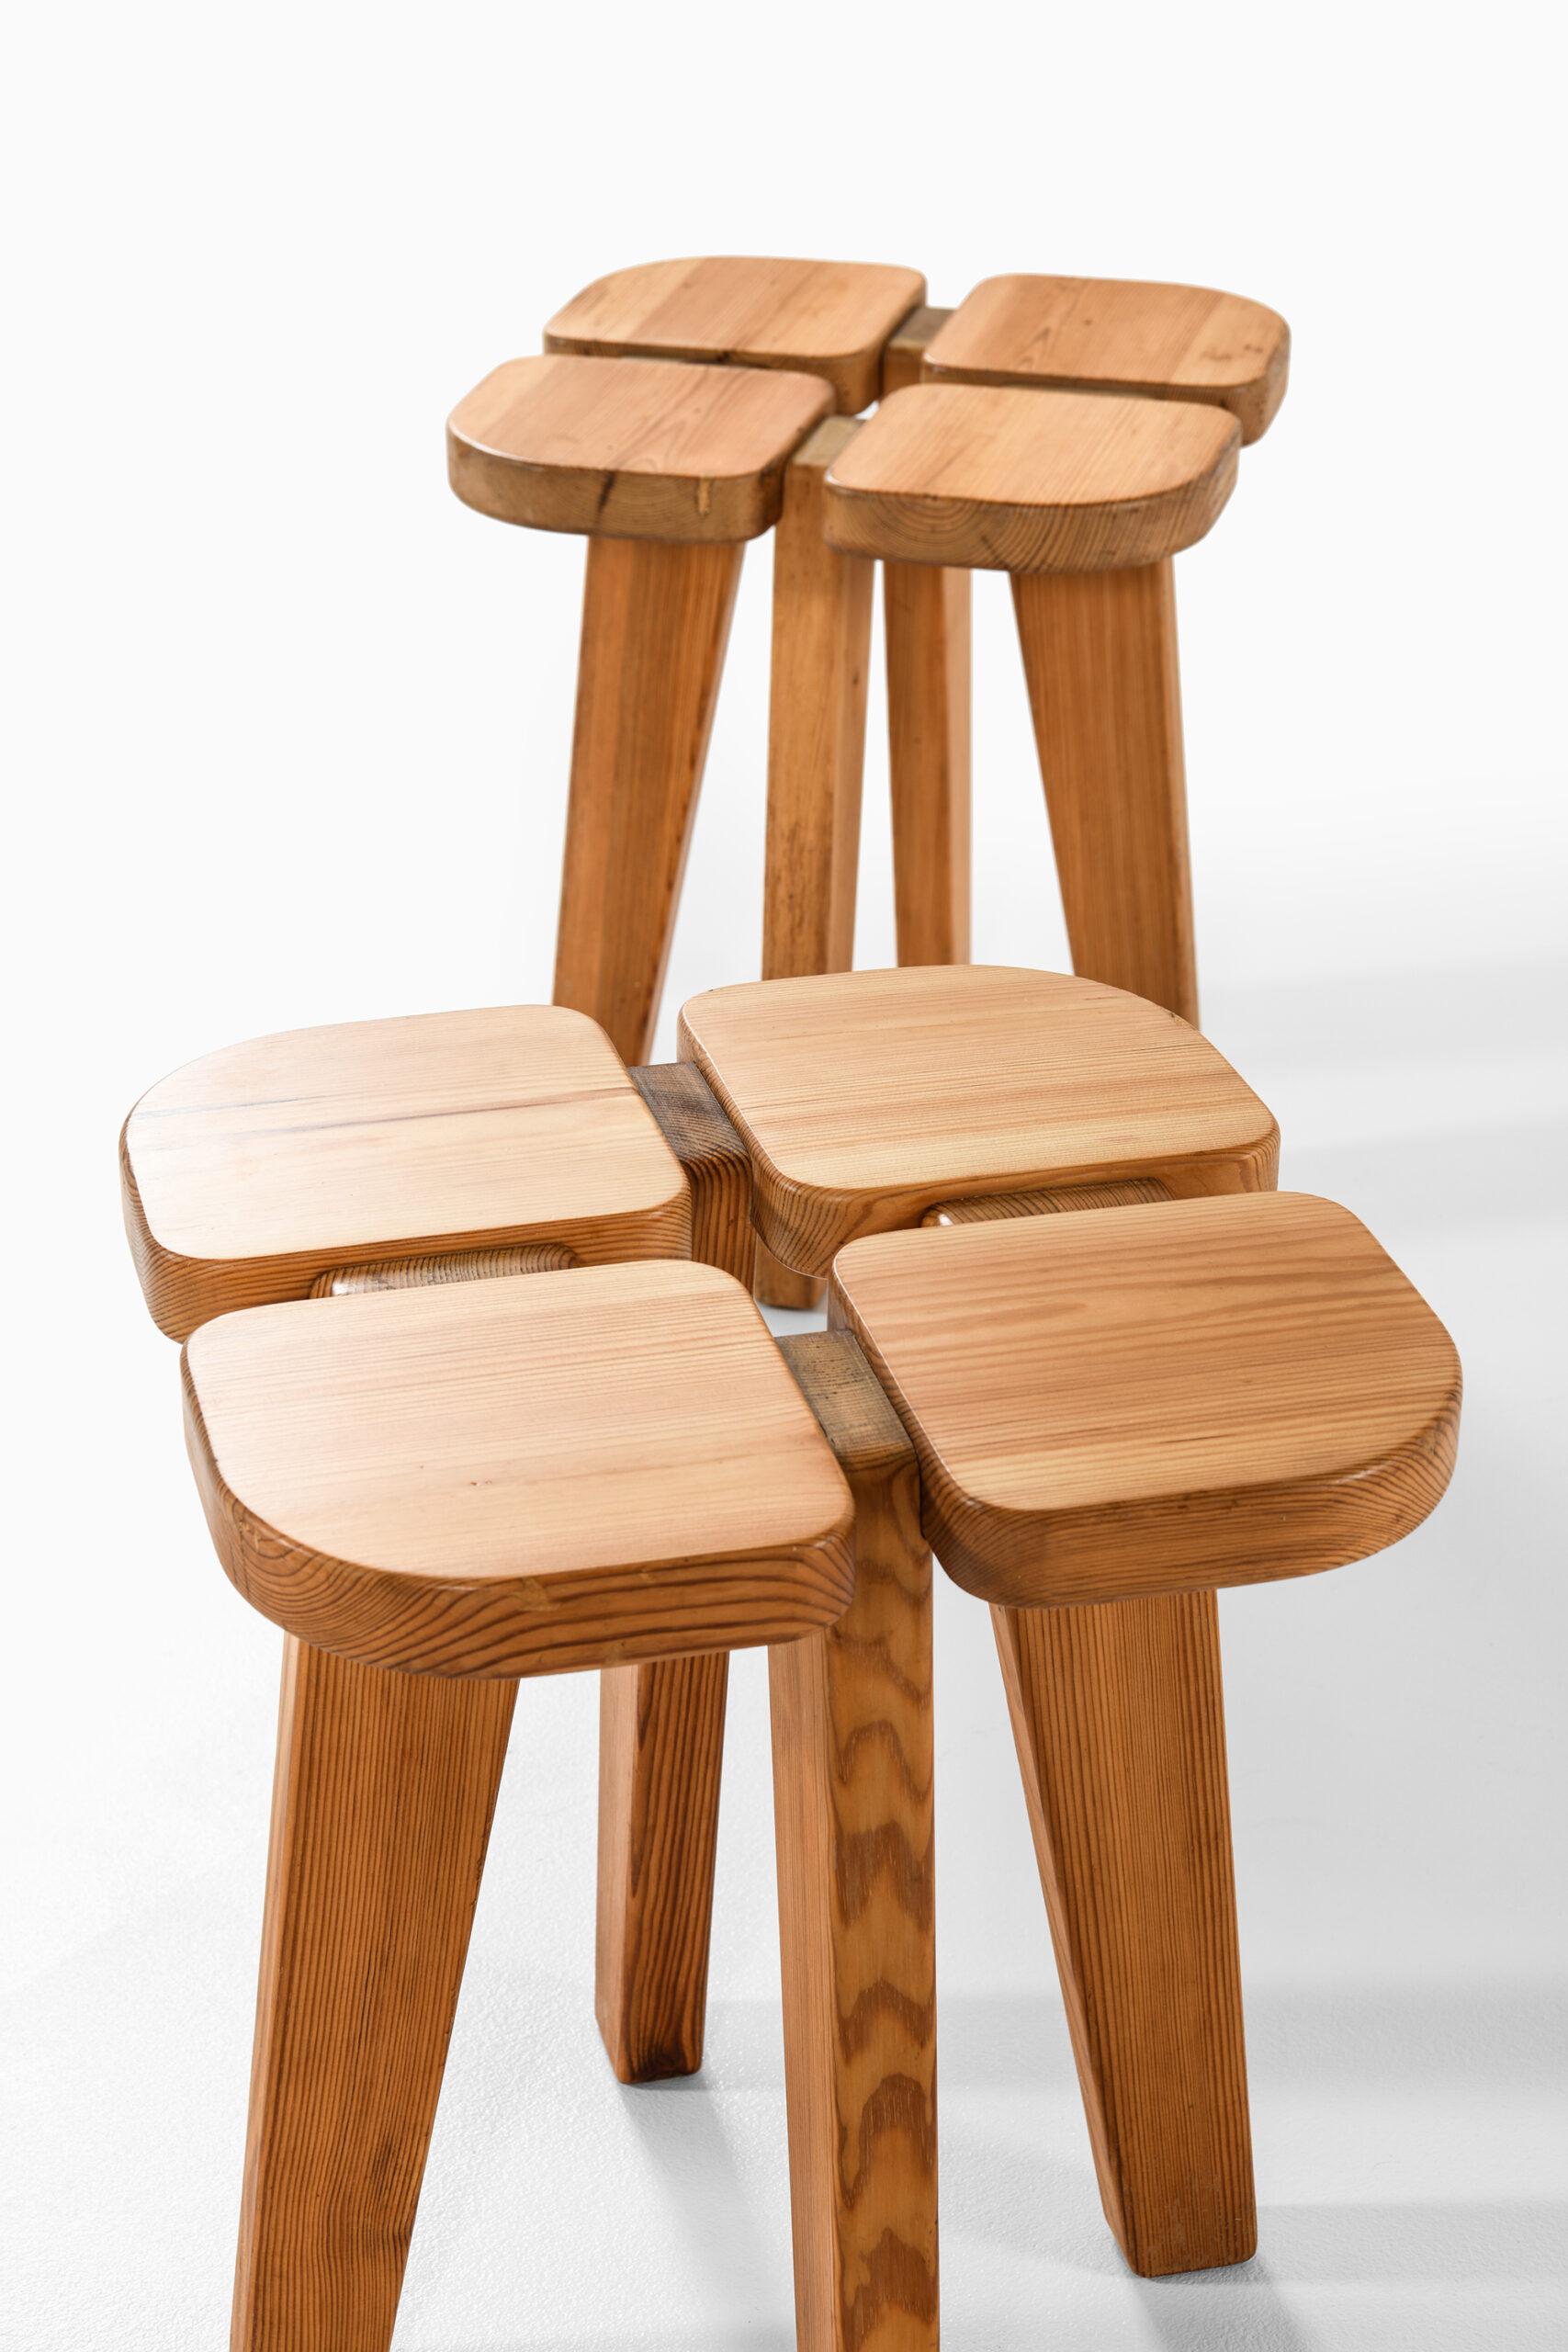 Late 20th Century Lisa Johansson-Pape Stools Model Apila Produced by Stockmann Oy For Sale